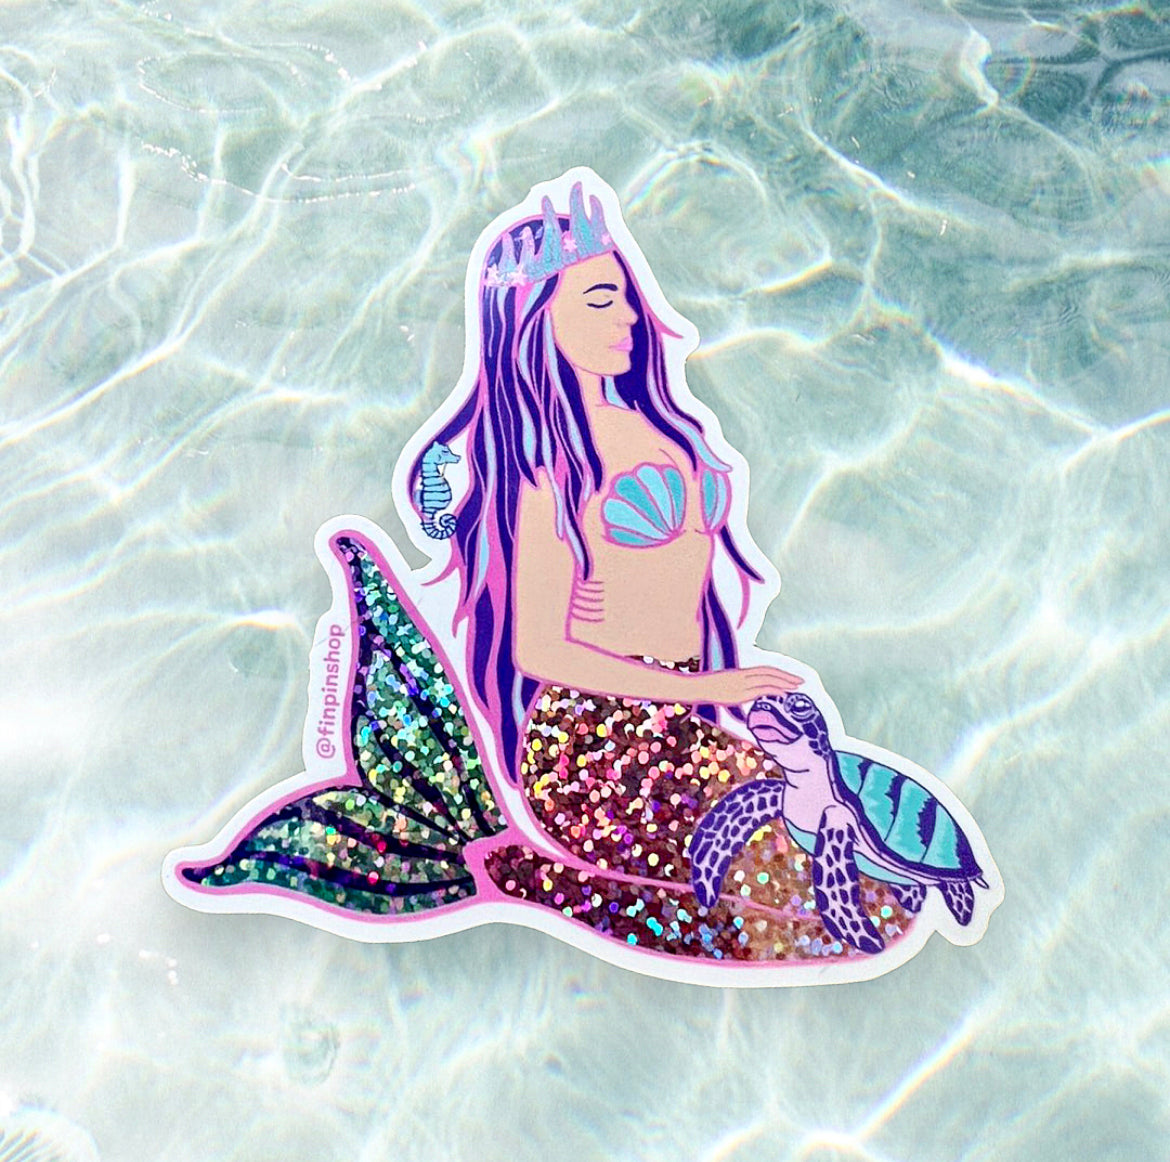 Mermaid and fins sticker